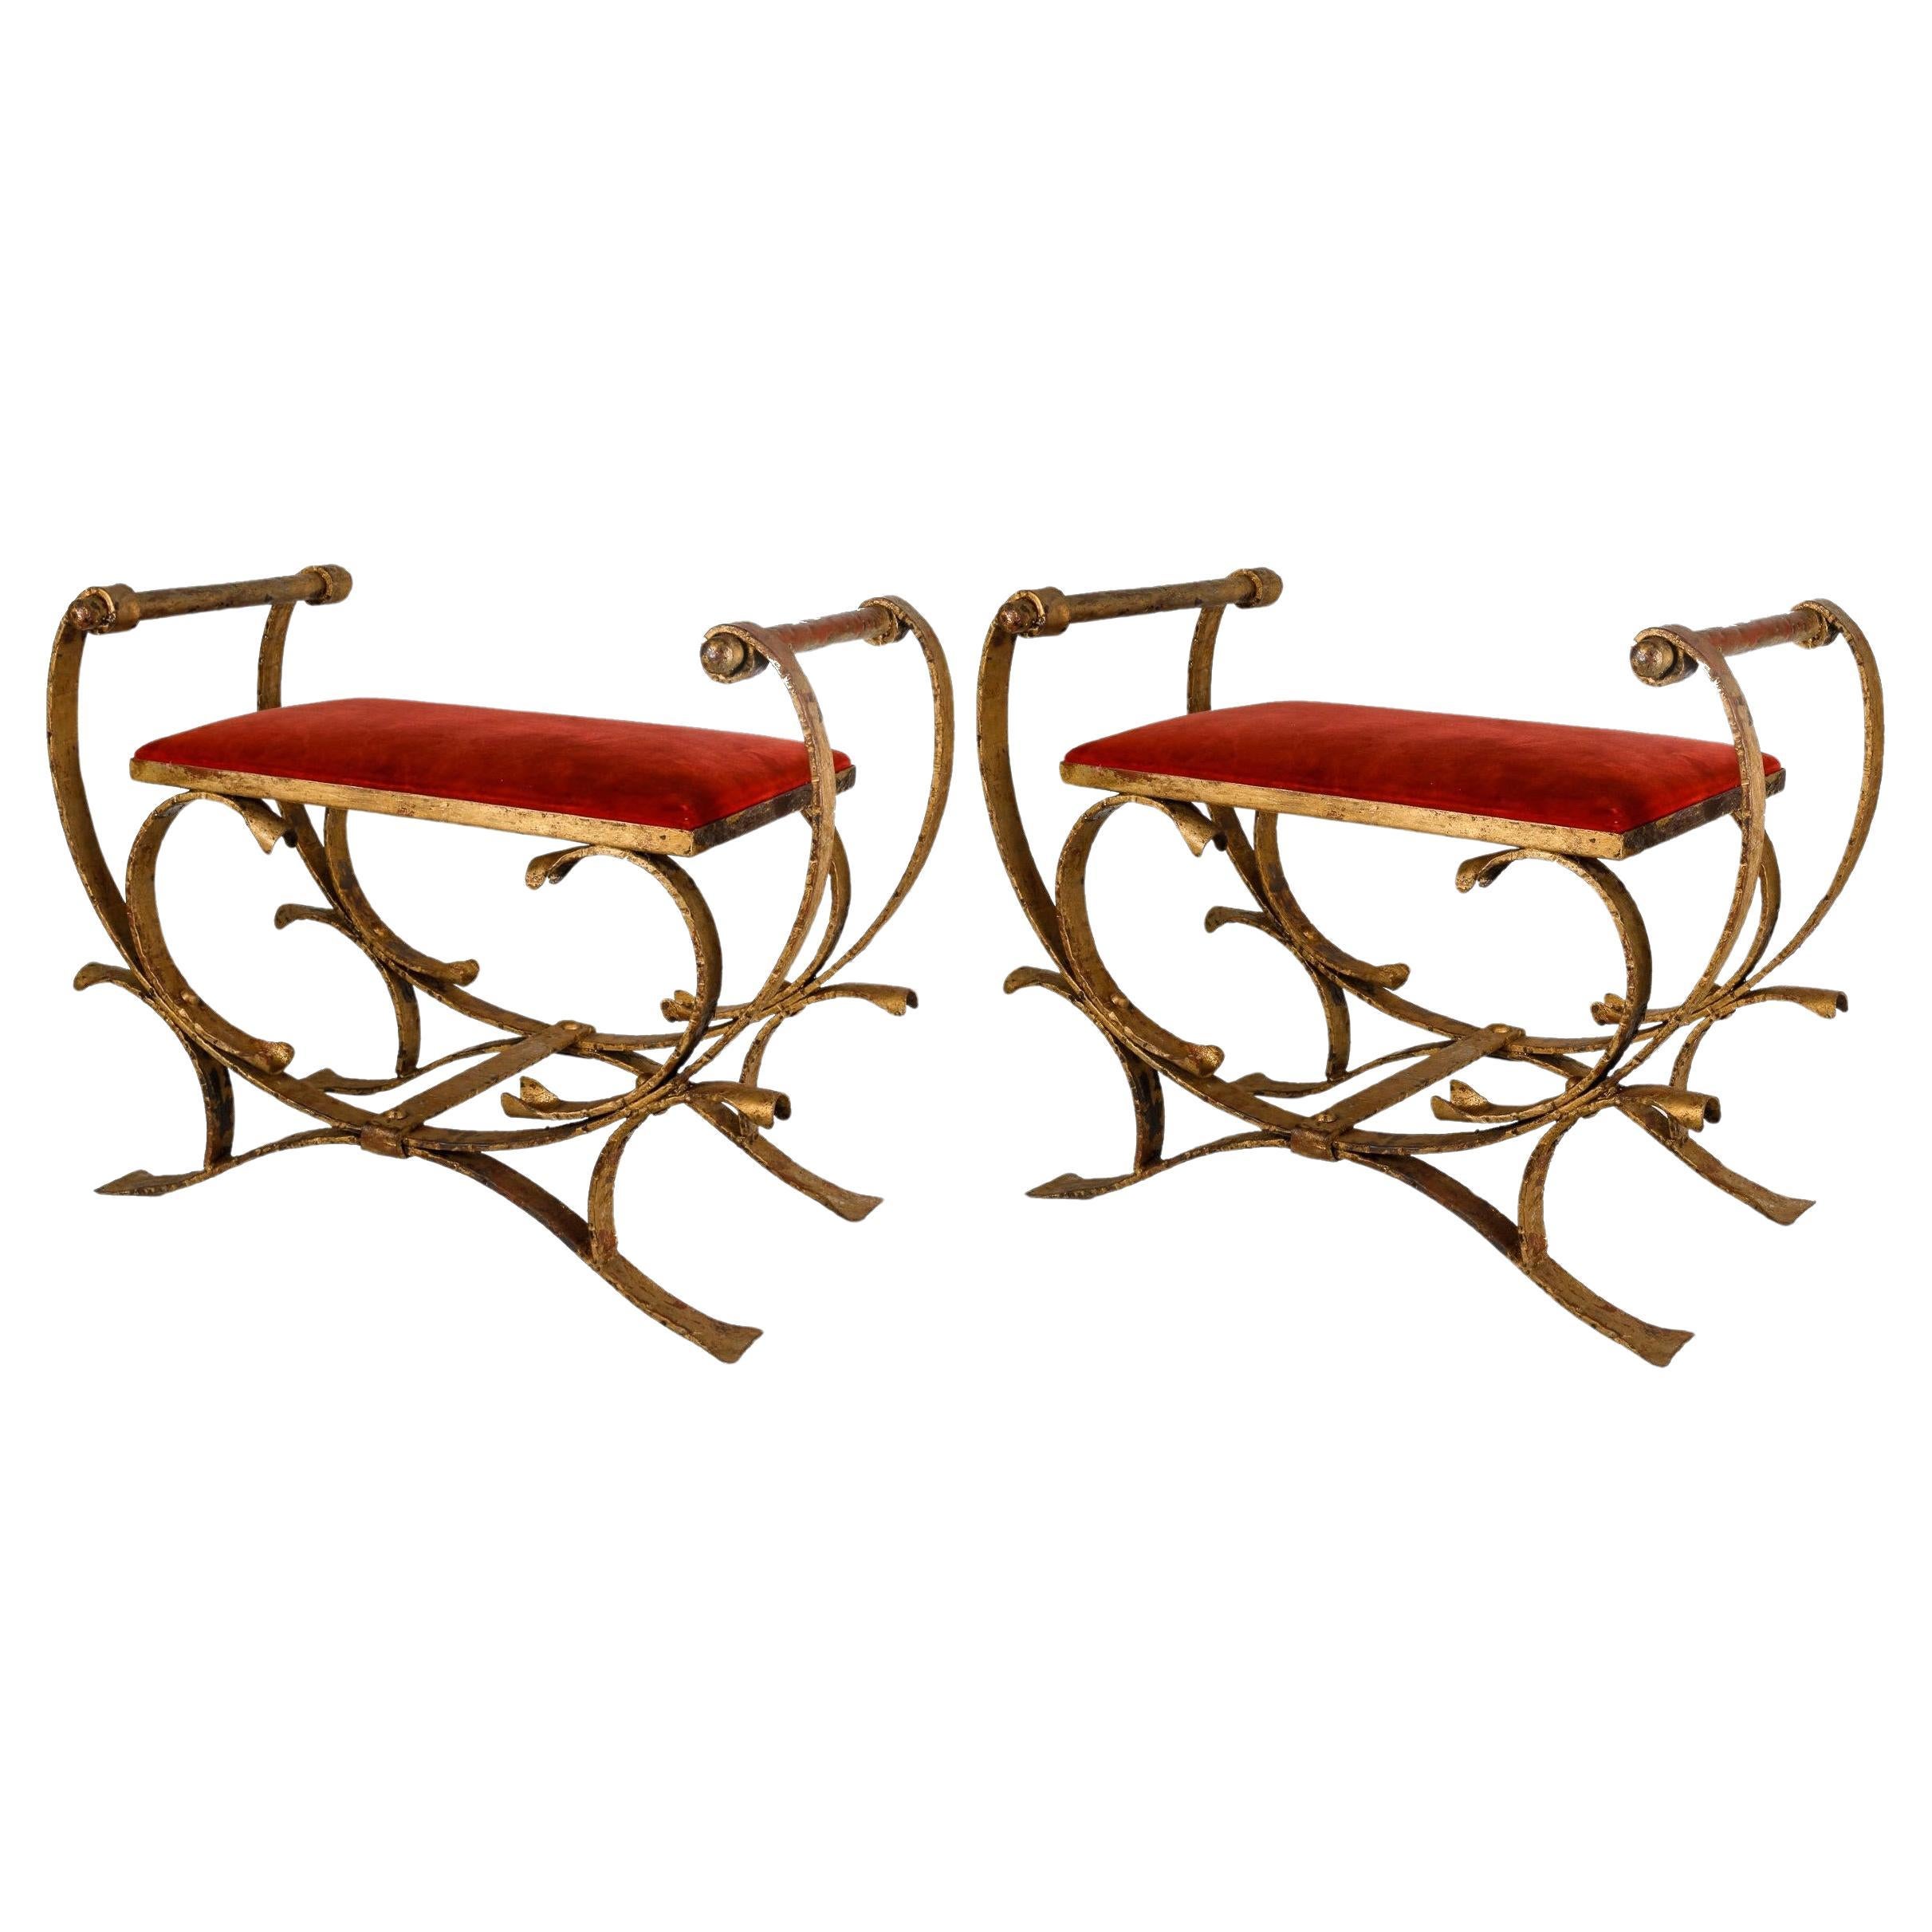 Pair of Gilded Wrought Iron Curule Stools and Seats, Early 20th Century. For Sale